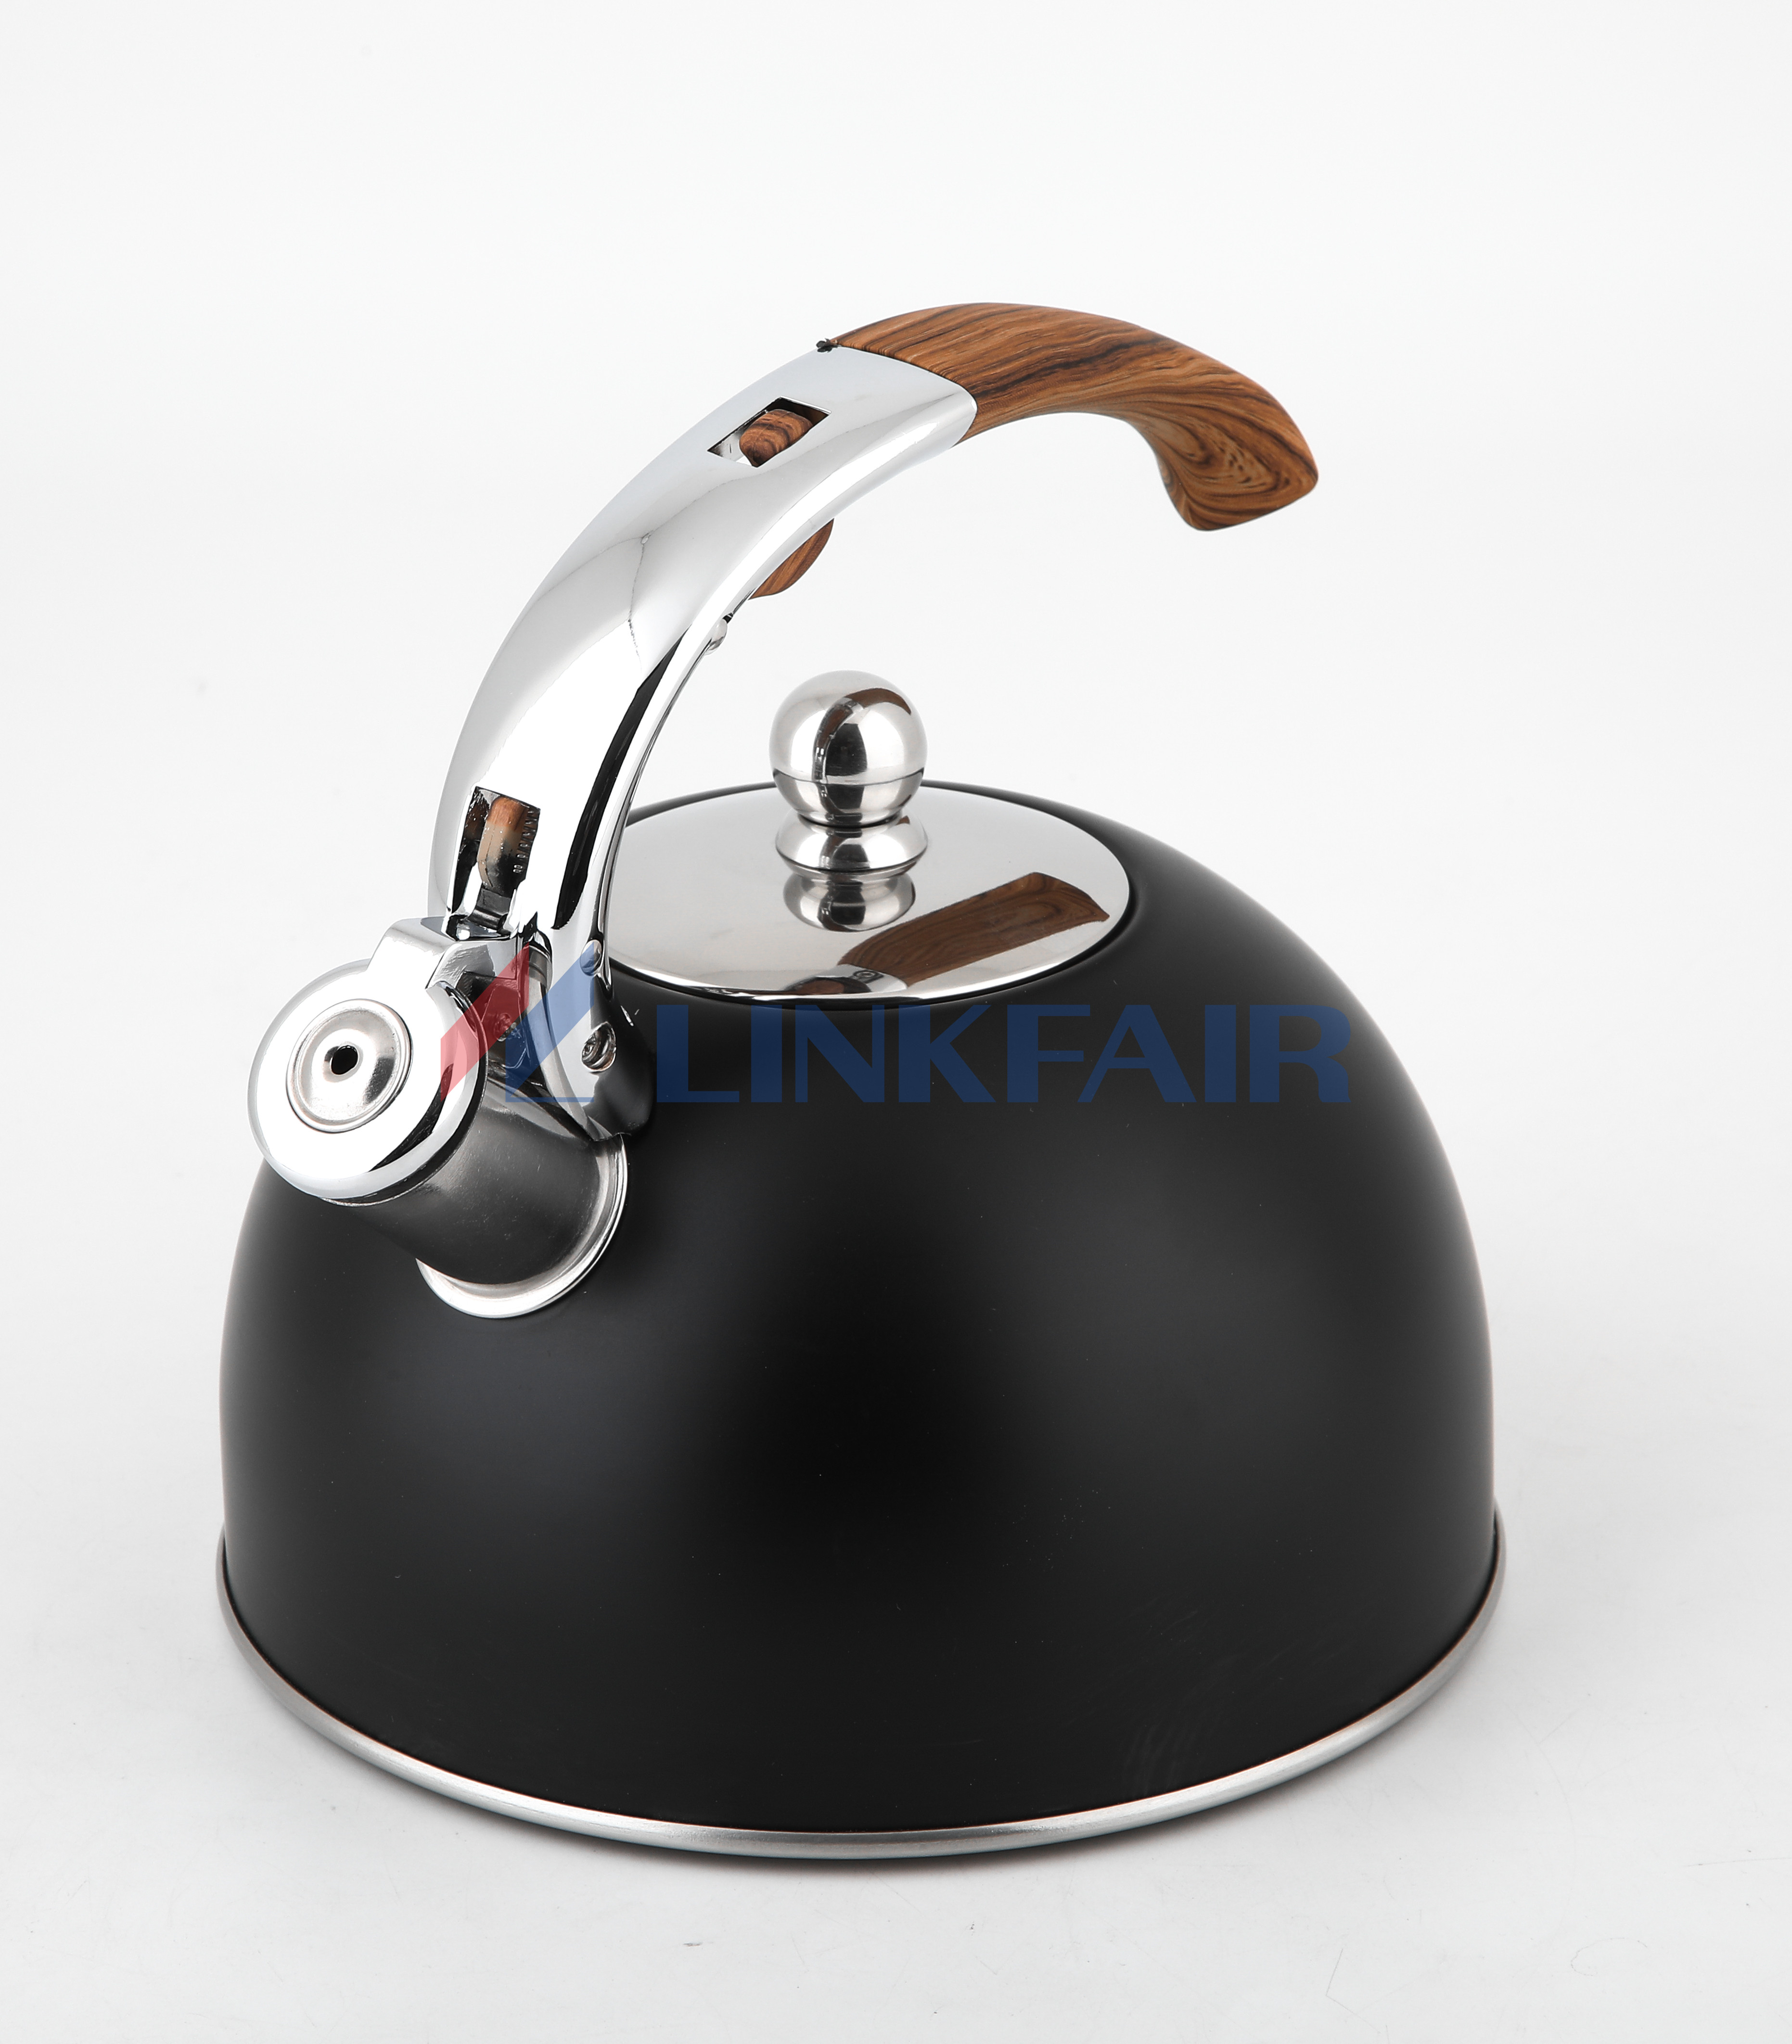  2.5L Kettle with Black Heat resistance coating